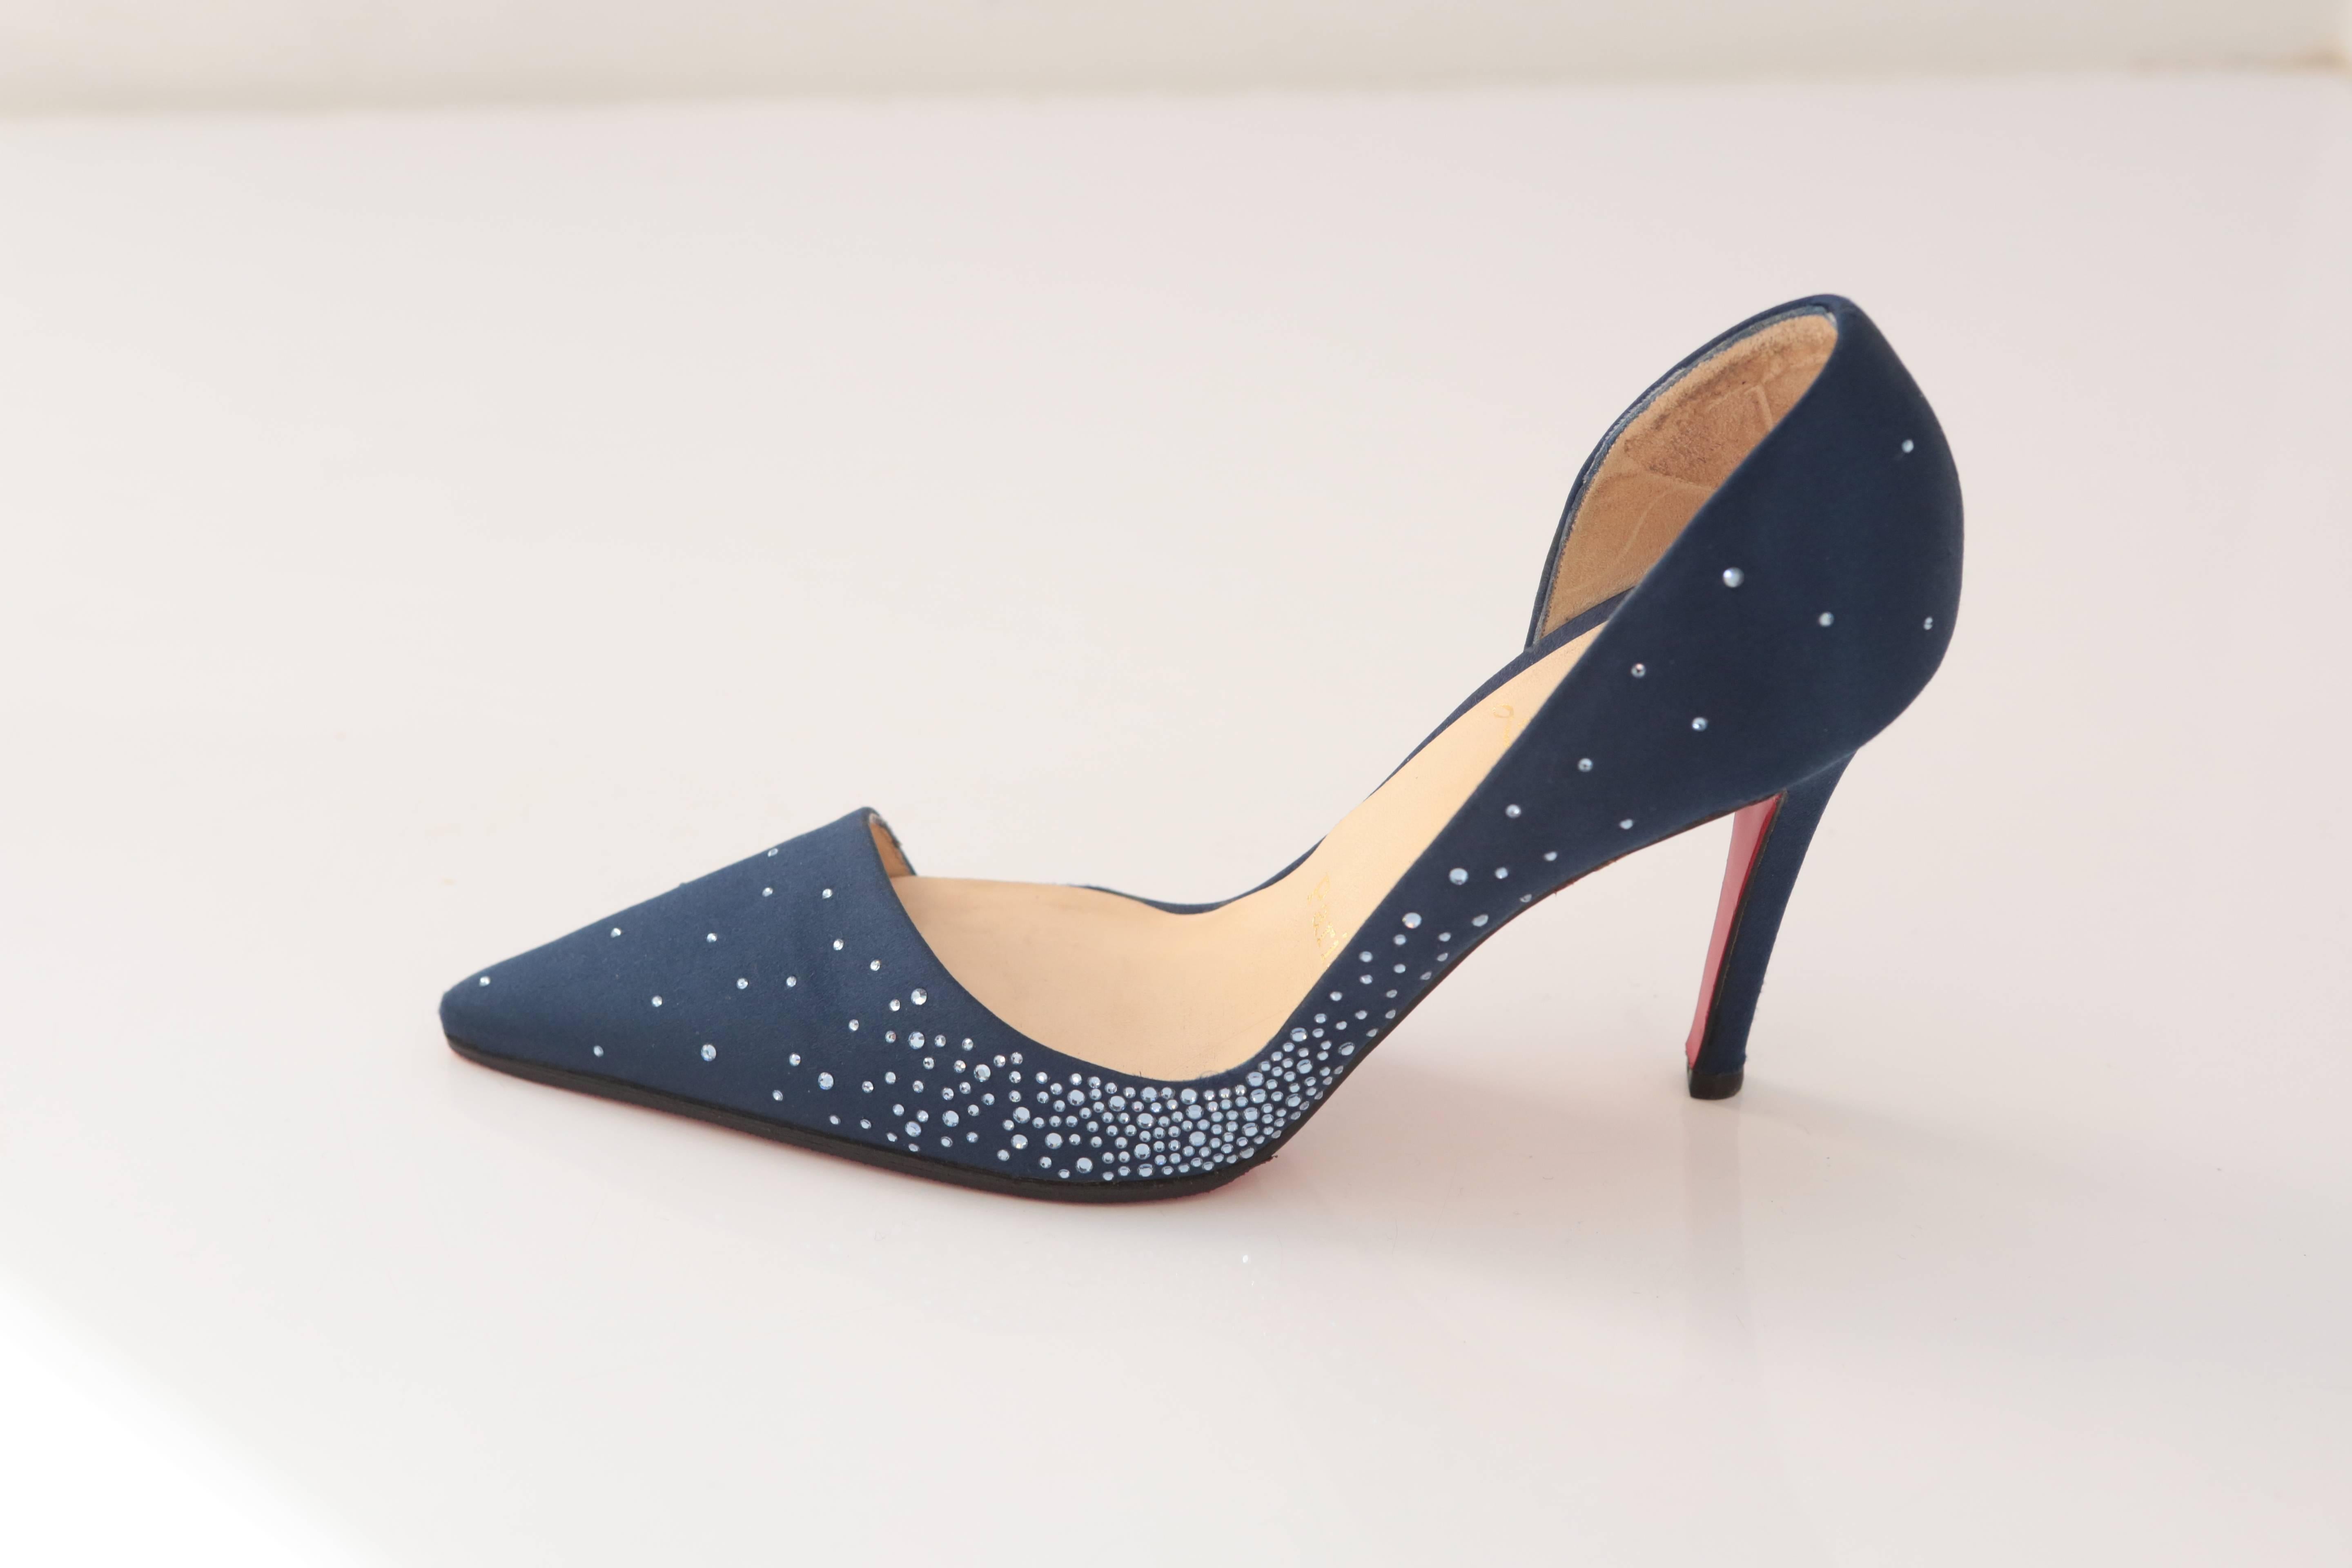 Something blue, something new or even something just for you! This Christian Louboutin D'orsay Pump in midnight blue satin with perfectly adorned crystals in all the right places will make you the belle of the ball.  SIZE 36